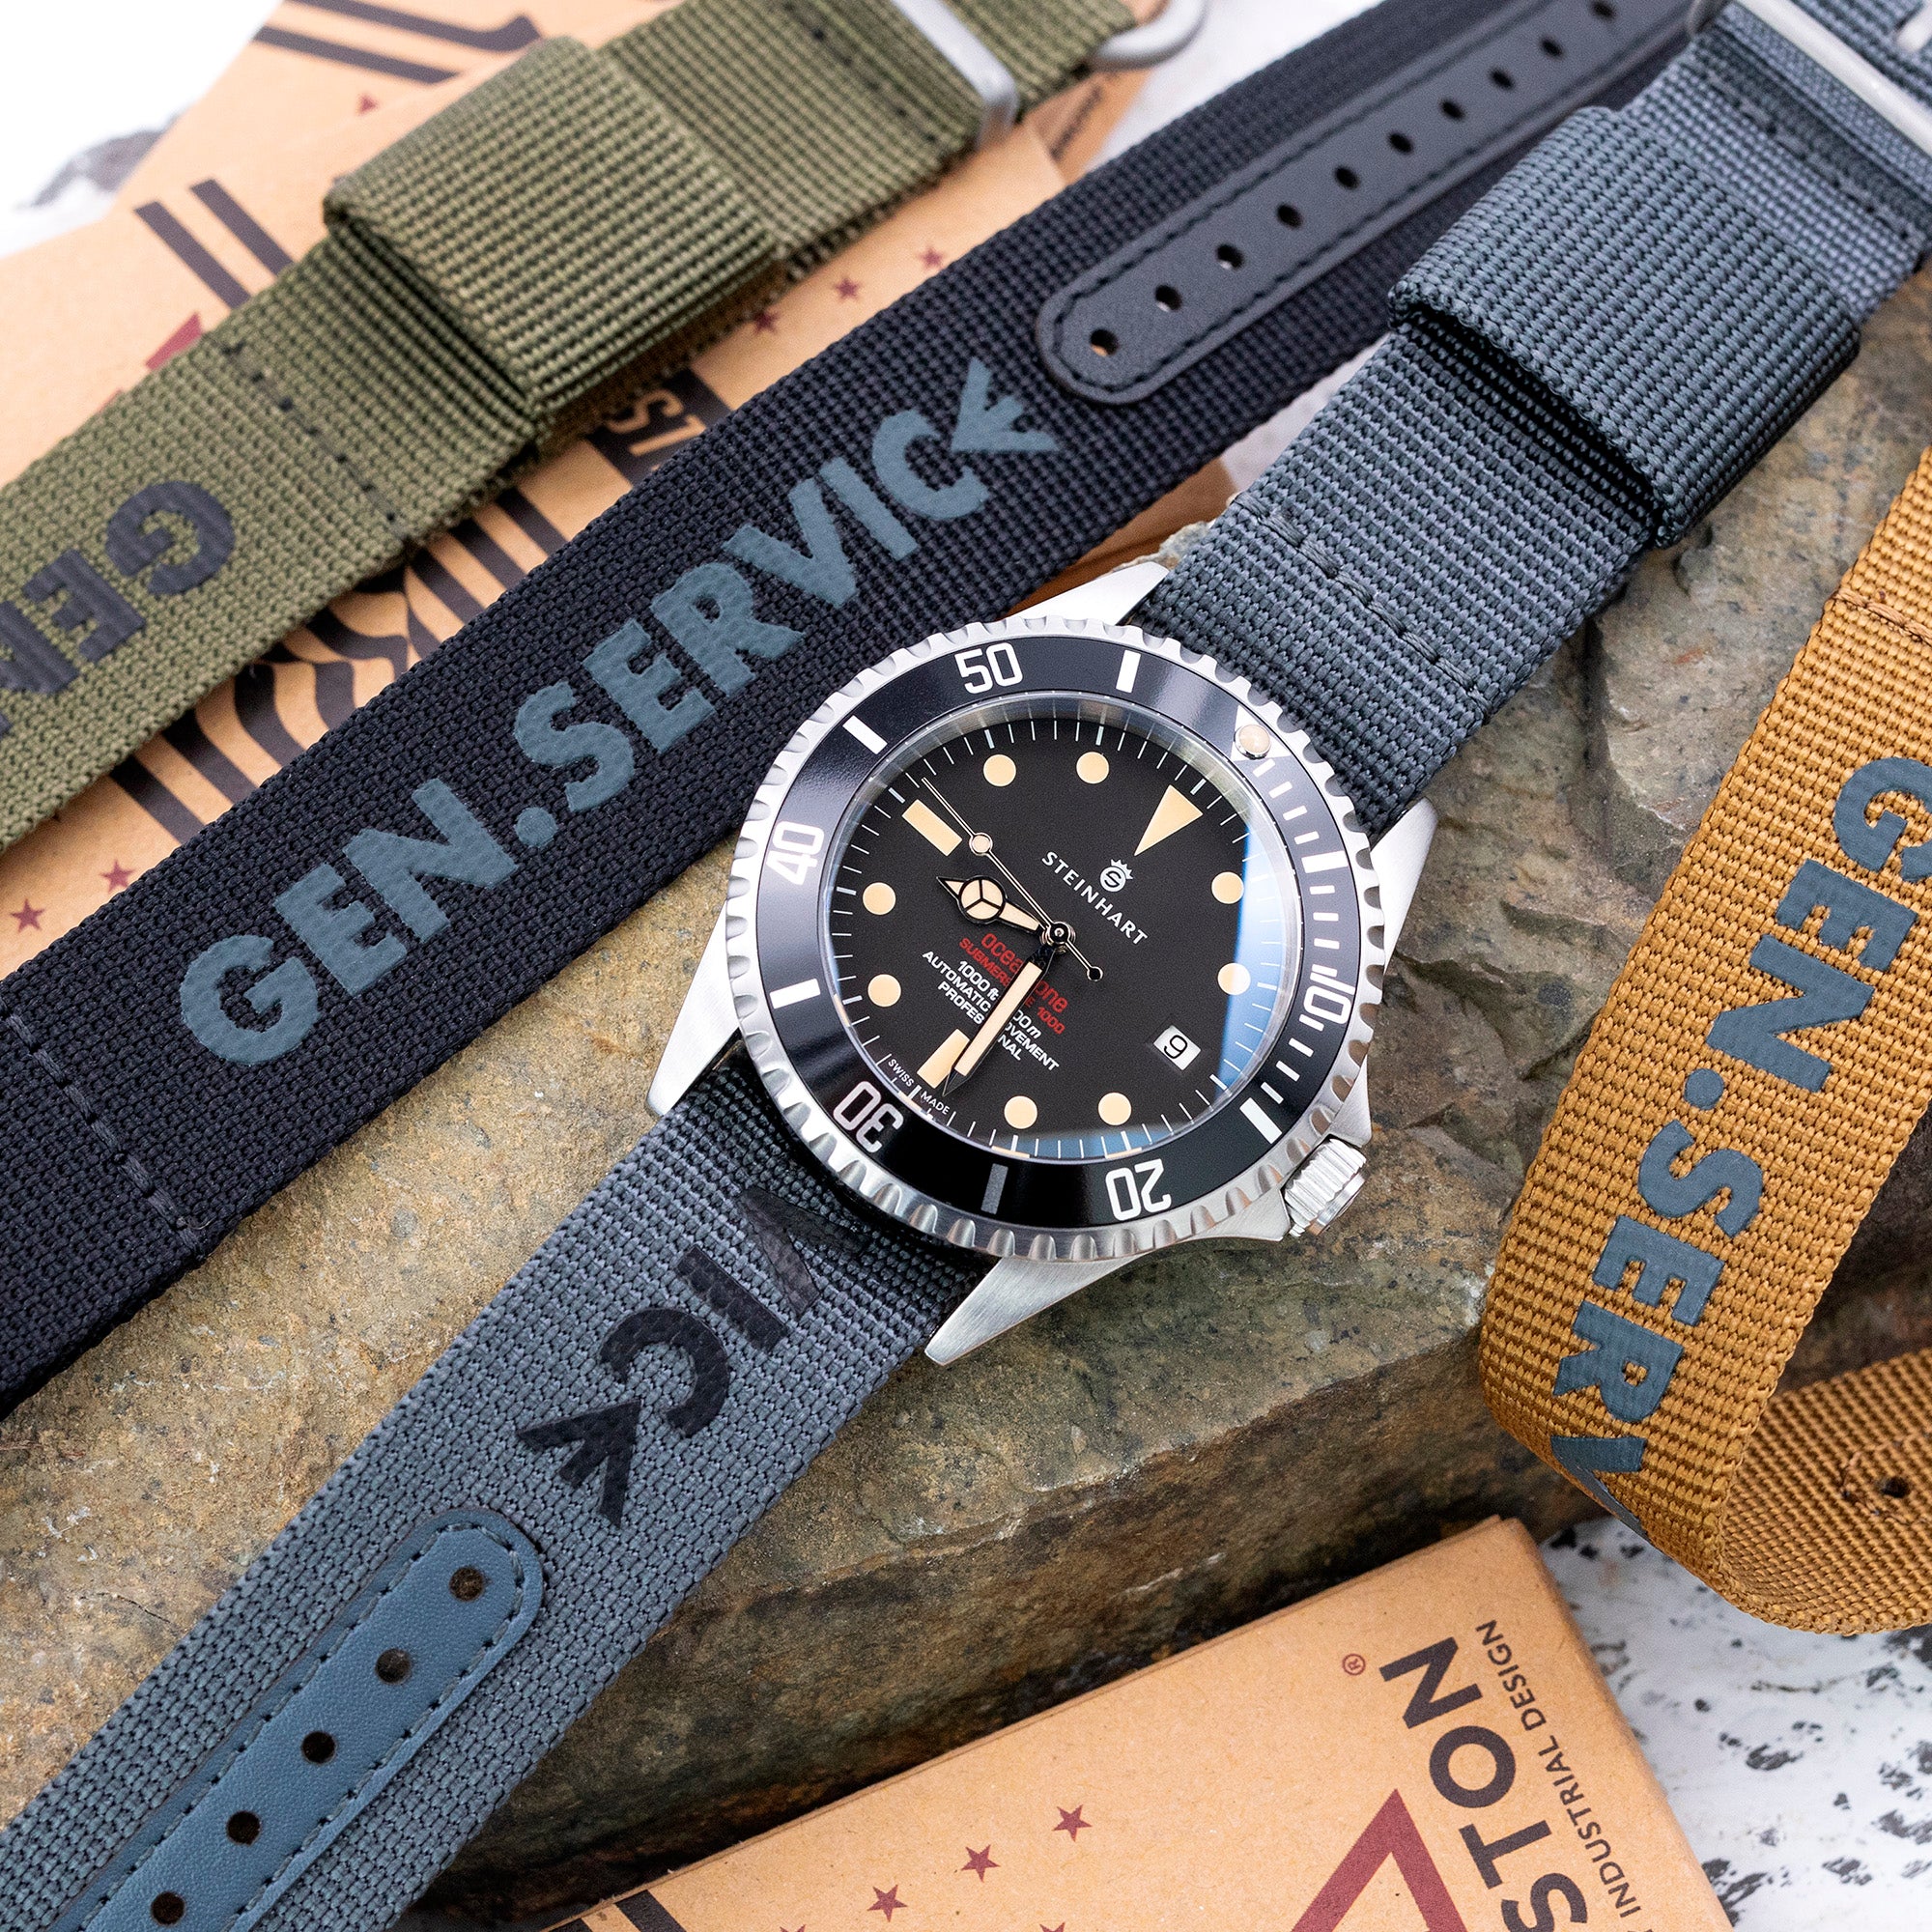 HAVESTON UK, A Heartful Military-themed Watch straps